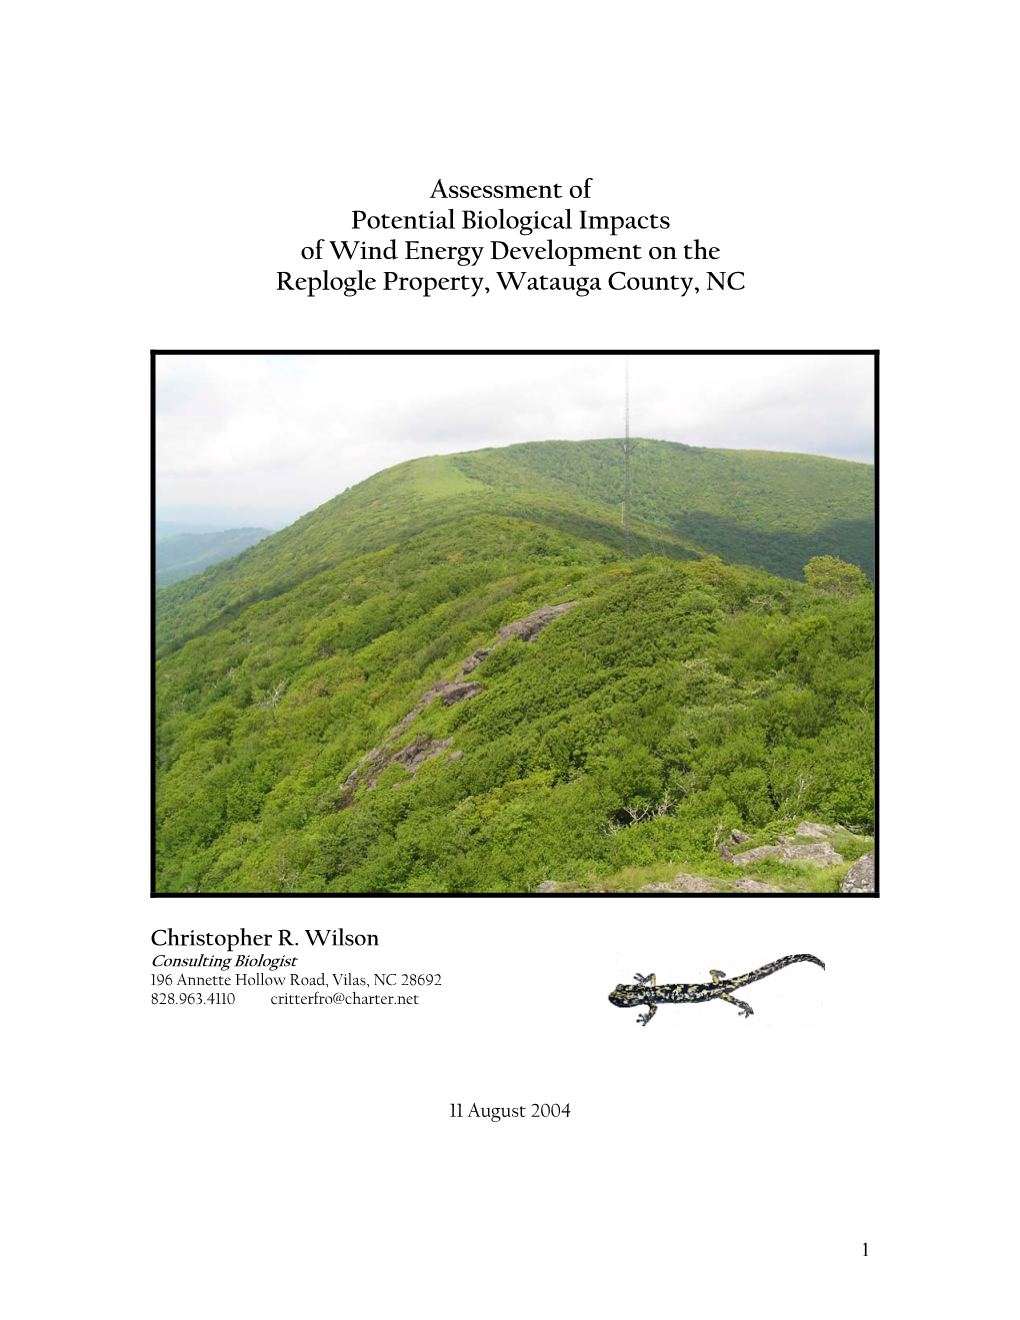 Assessment of Potential Biological Impacts of Wind Energy Development on the Replogle Property, Watauga County, NC